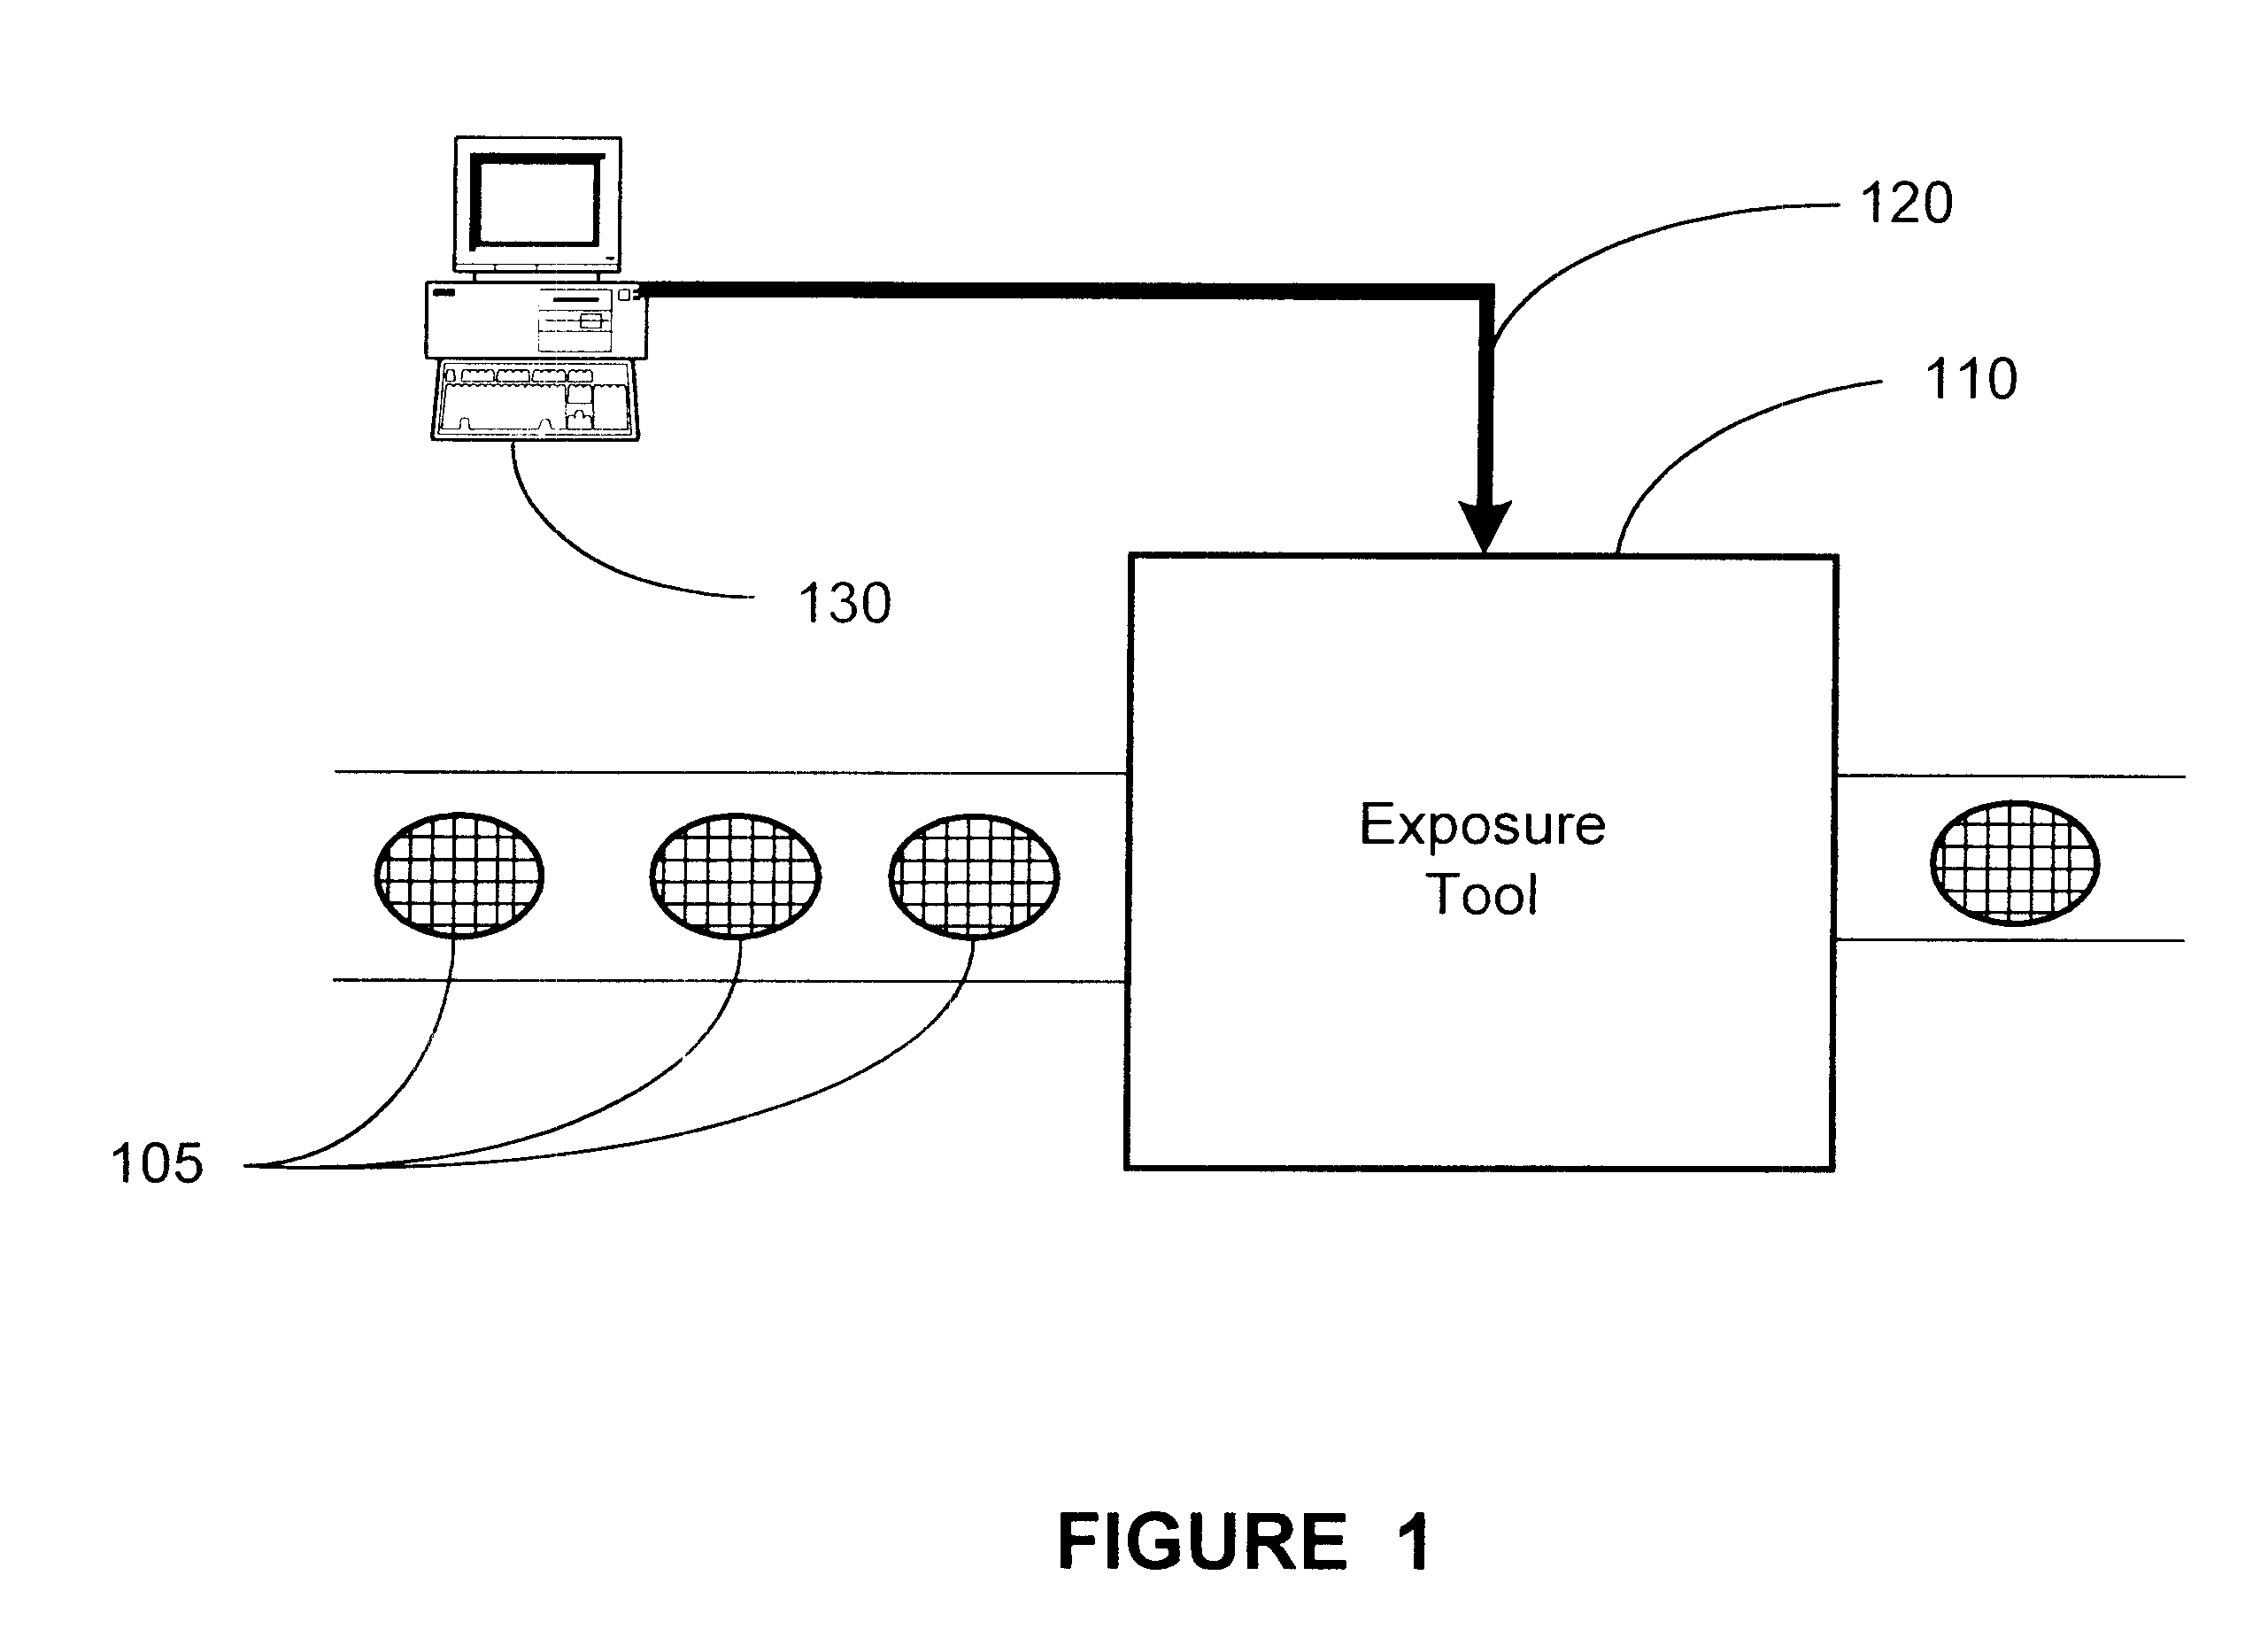 Method and apparatus for performing run-to-run control in a batch manufacturing environment